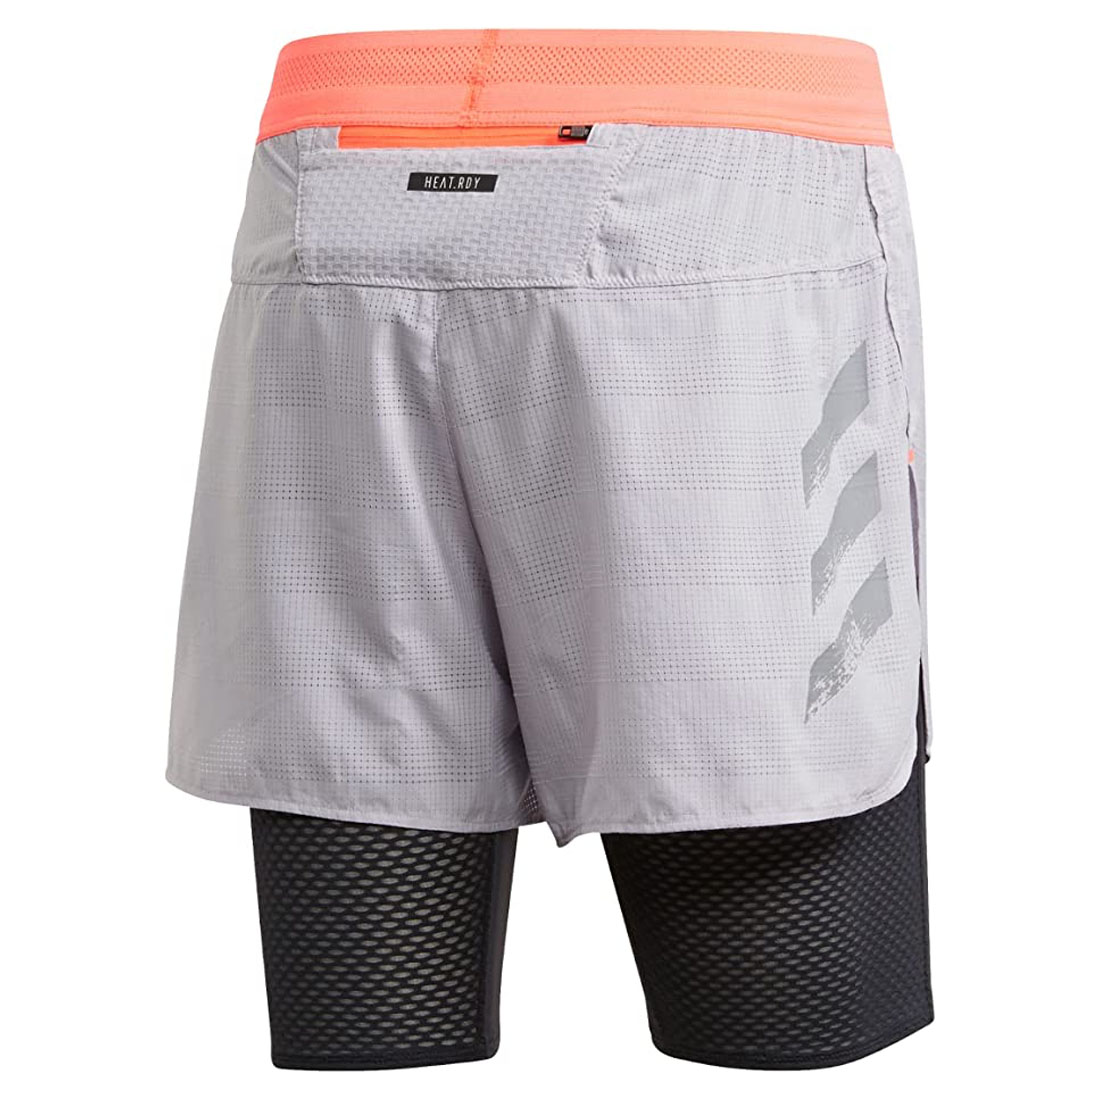 Adidas Heat RDY Mens Woven Grey 2 In 1 Running Shorts – Exclusive Sports